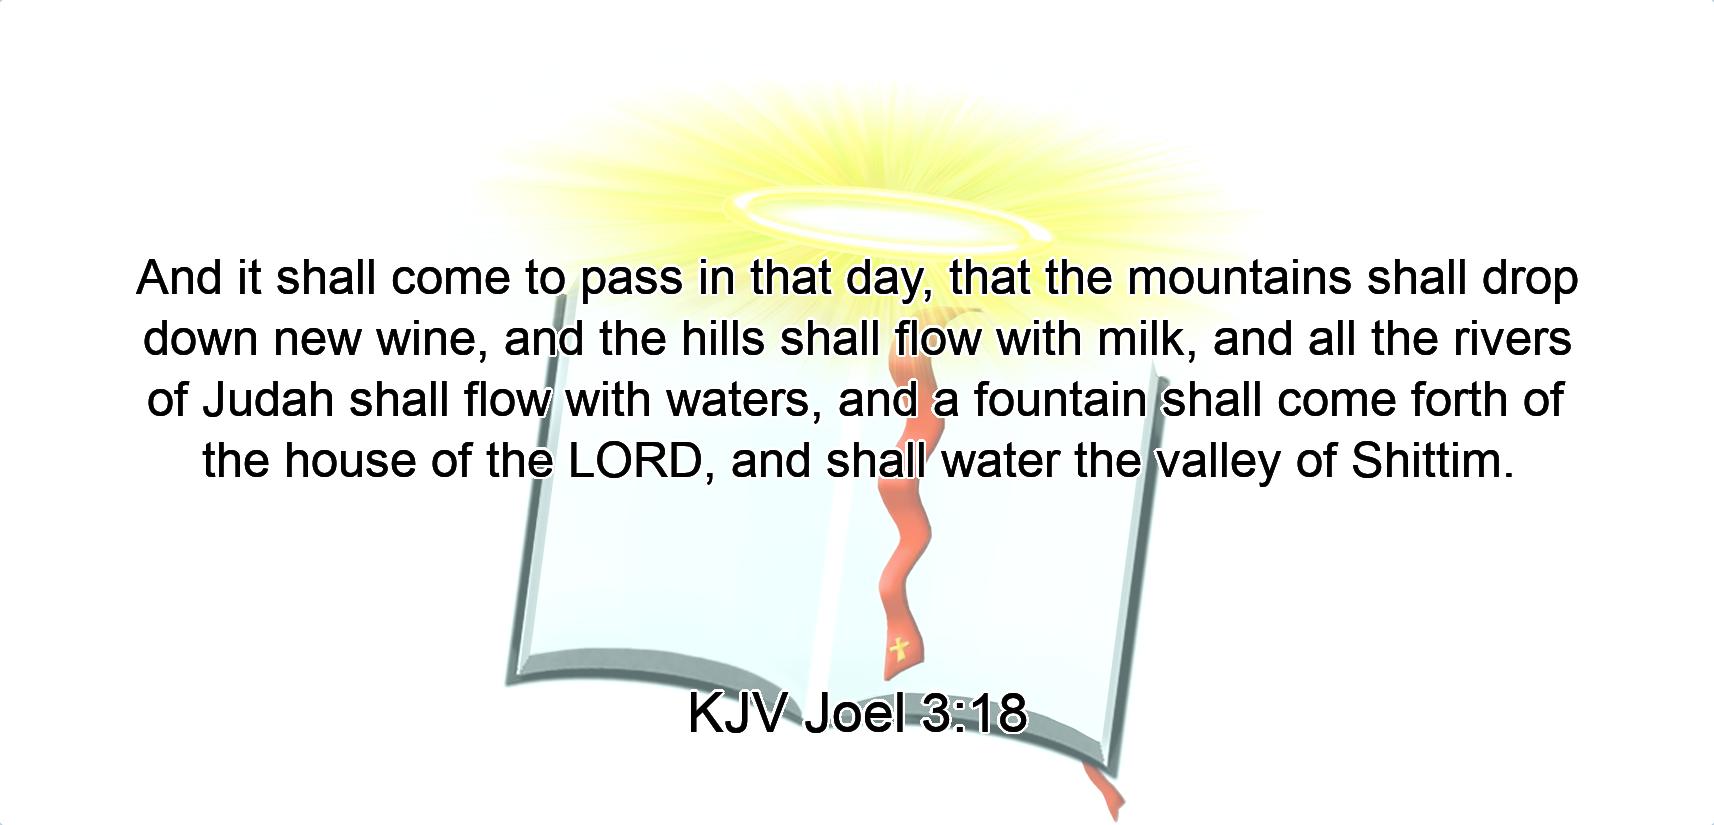 And it shall come to pass in that day, that the mountains shall drop down new wine, and the hills shall flow with milk, and all the rivers of Judah shall flow with waters, and a fountain shall come forth of the house of the LORD, and shall water the valley of Shittim.